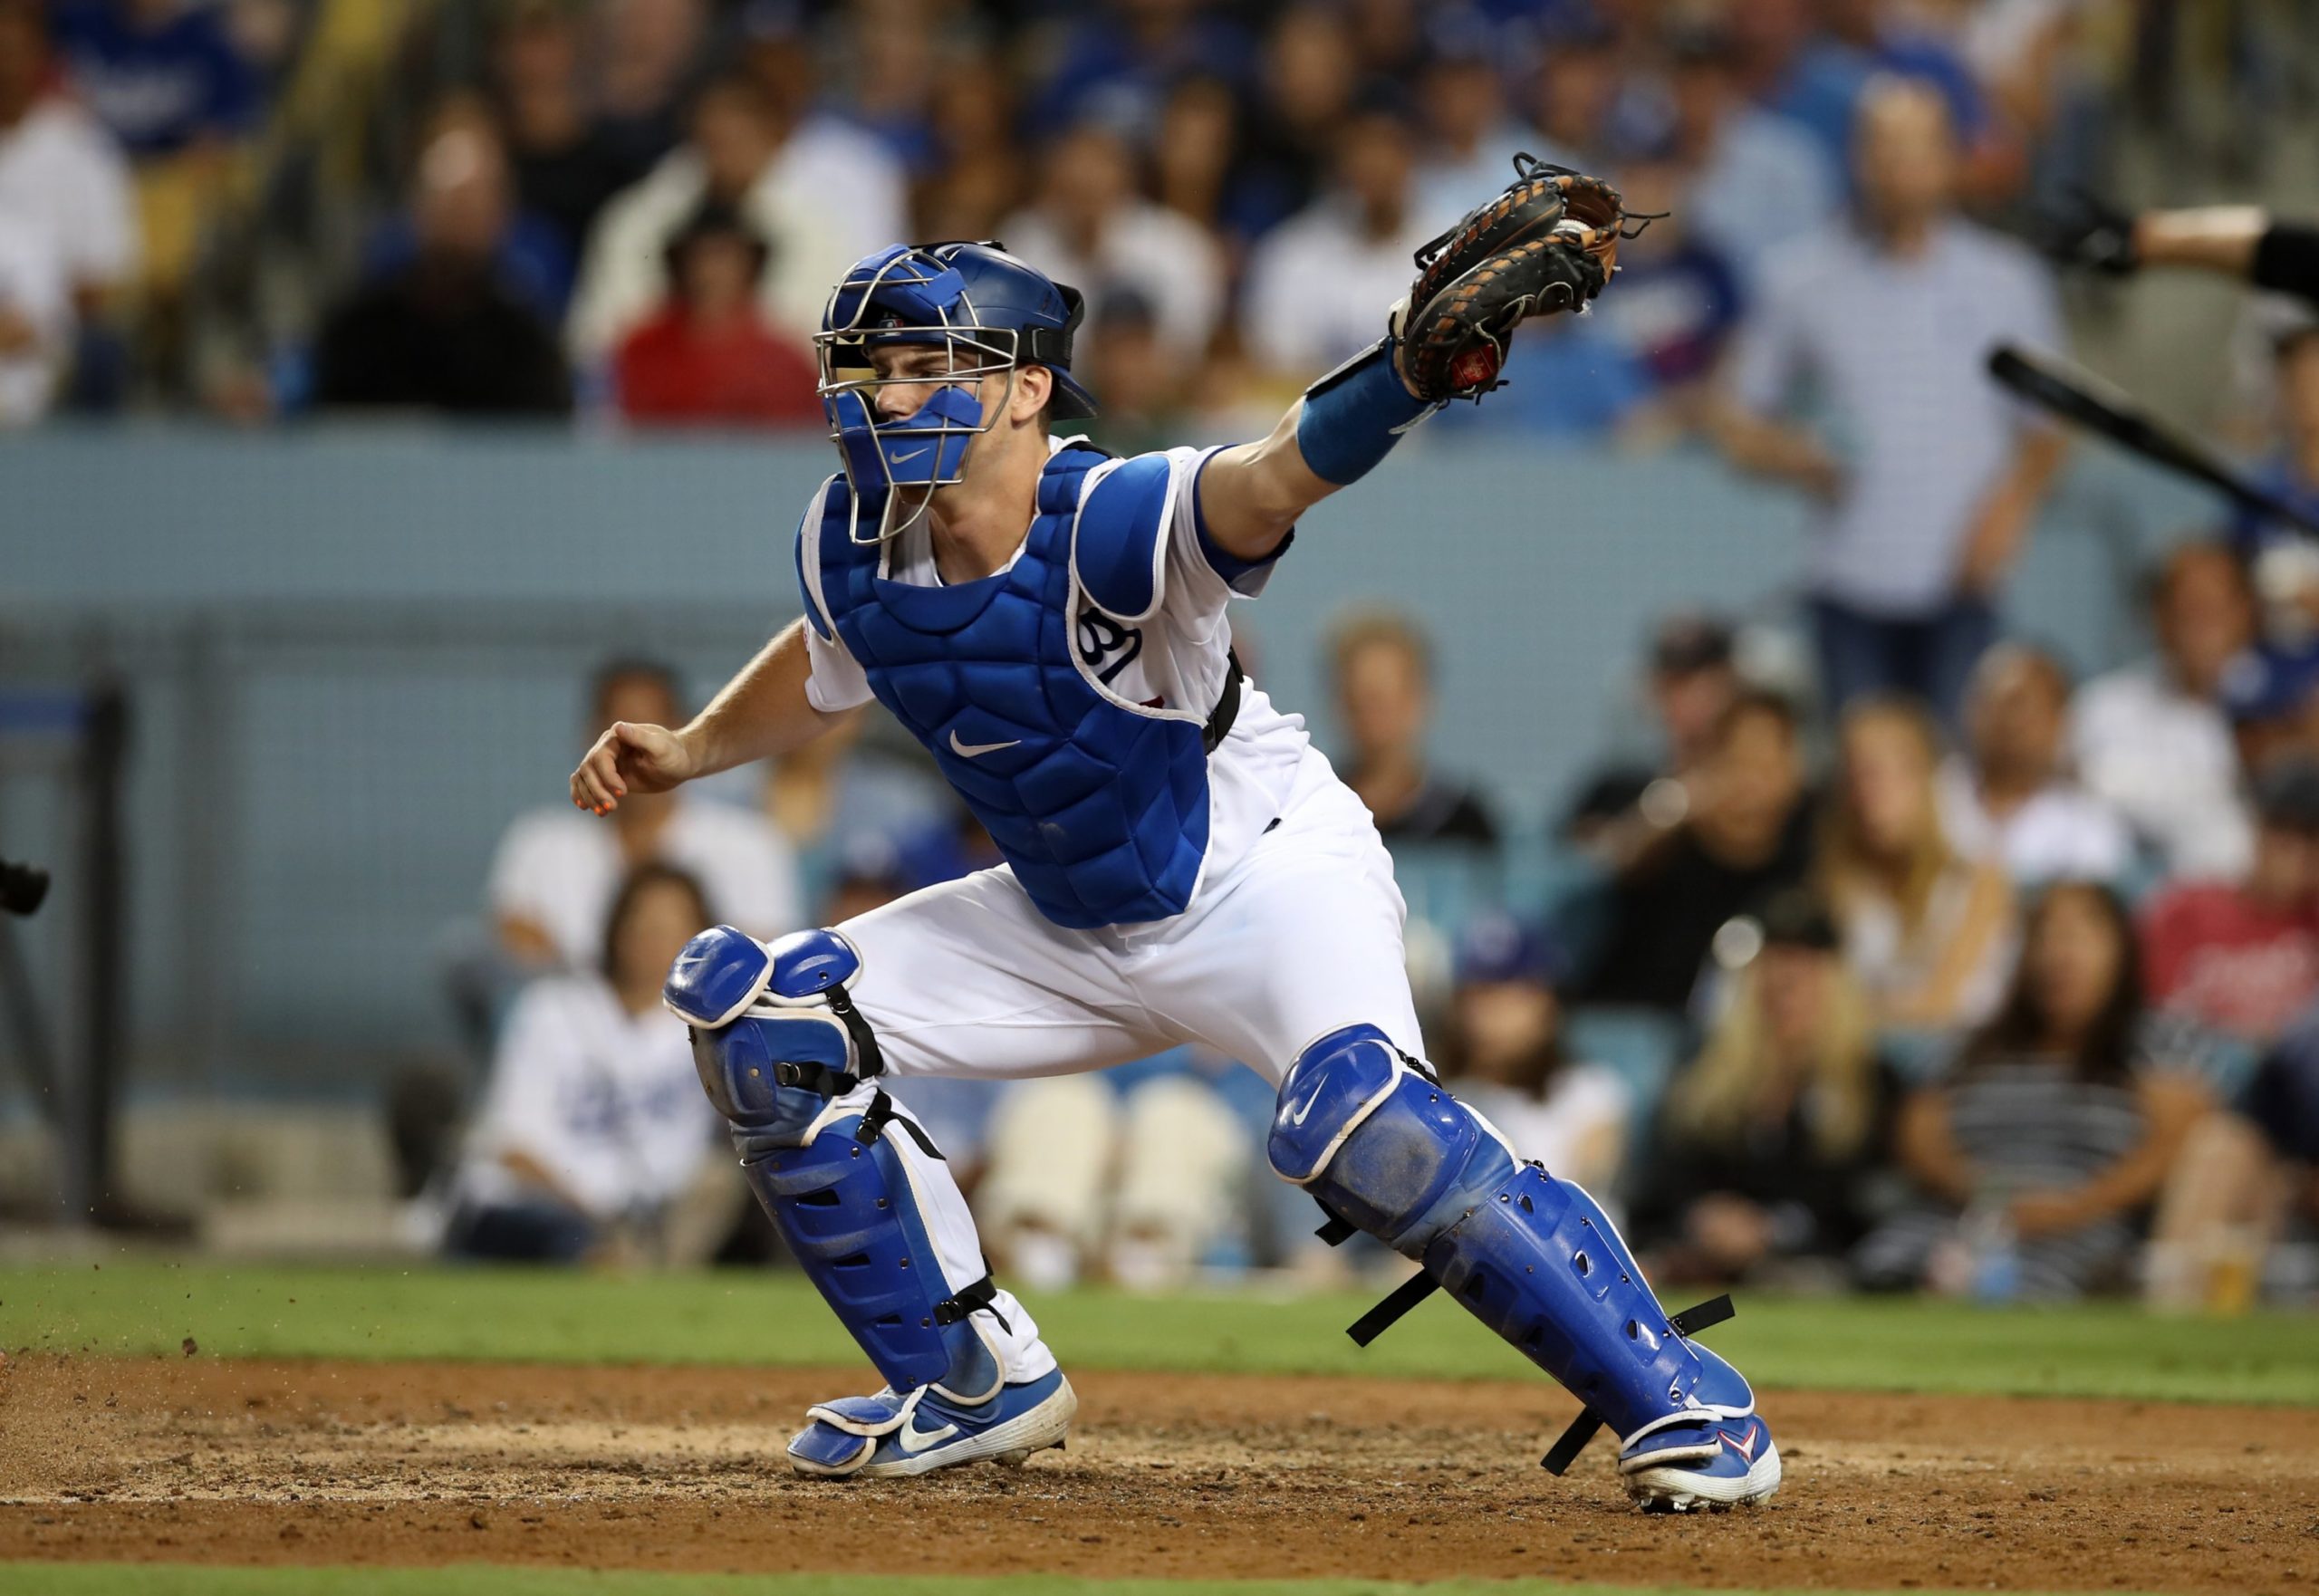 Dodgers catcher Will Smith improving but not looking to rush back